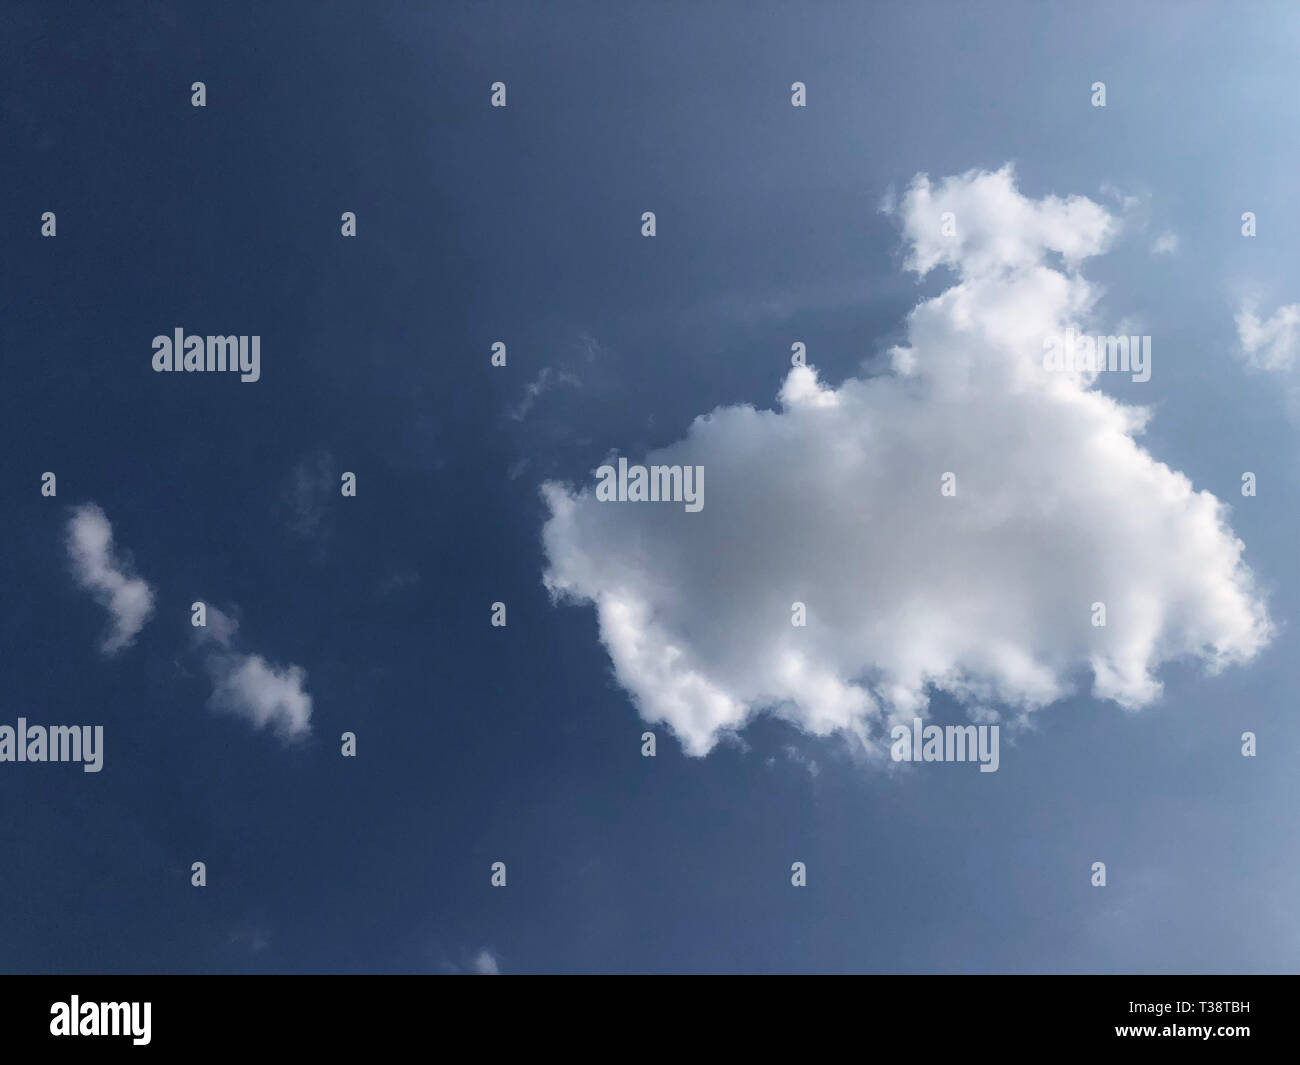 Clouds on blue and clear sky. Stock Photo